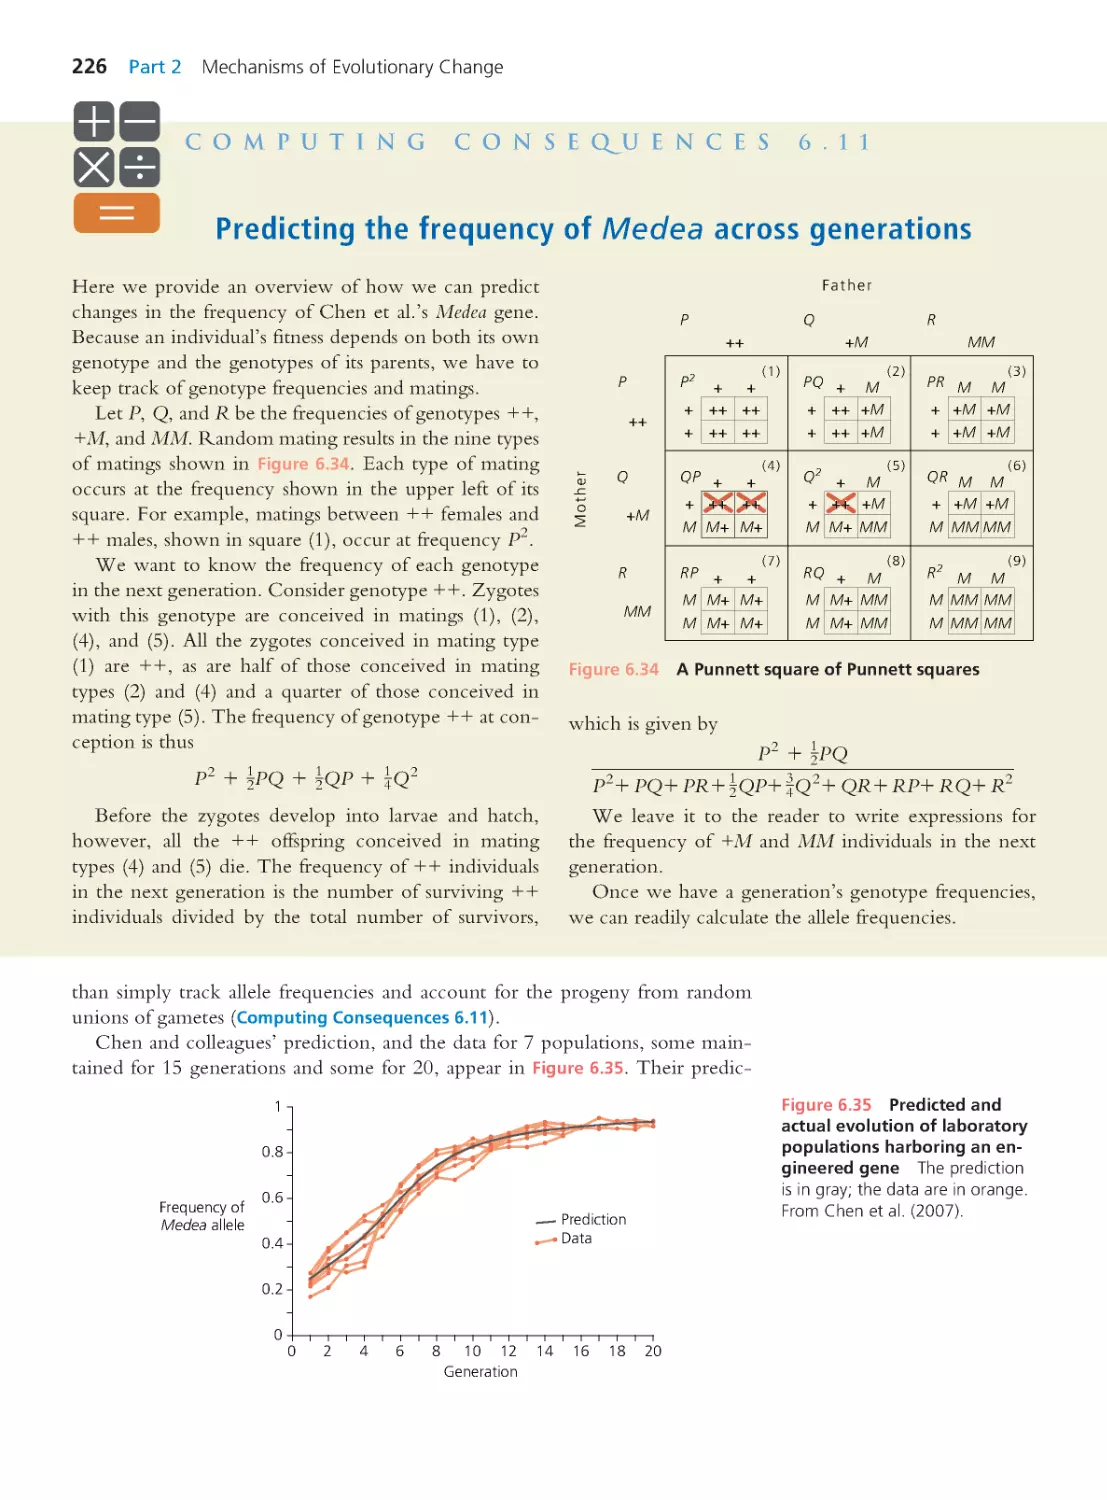 Computing Consequences 6.11 Predicting the frequency of Medea across generations